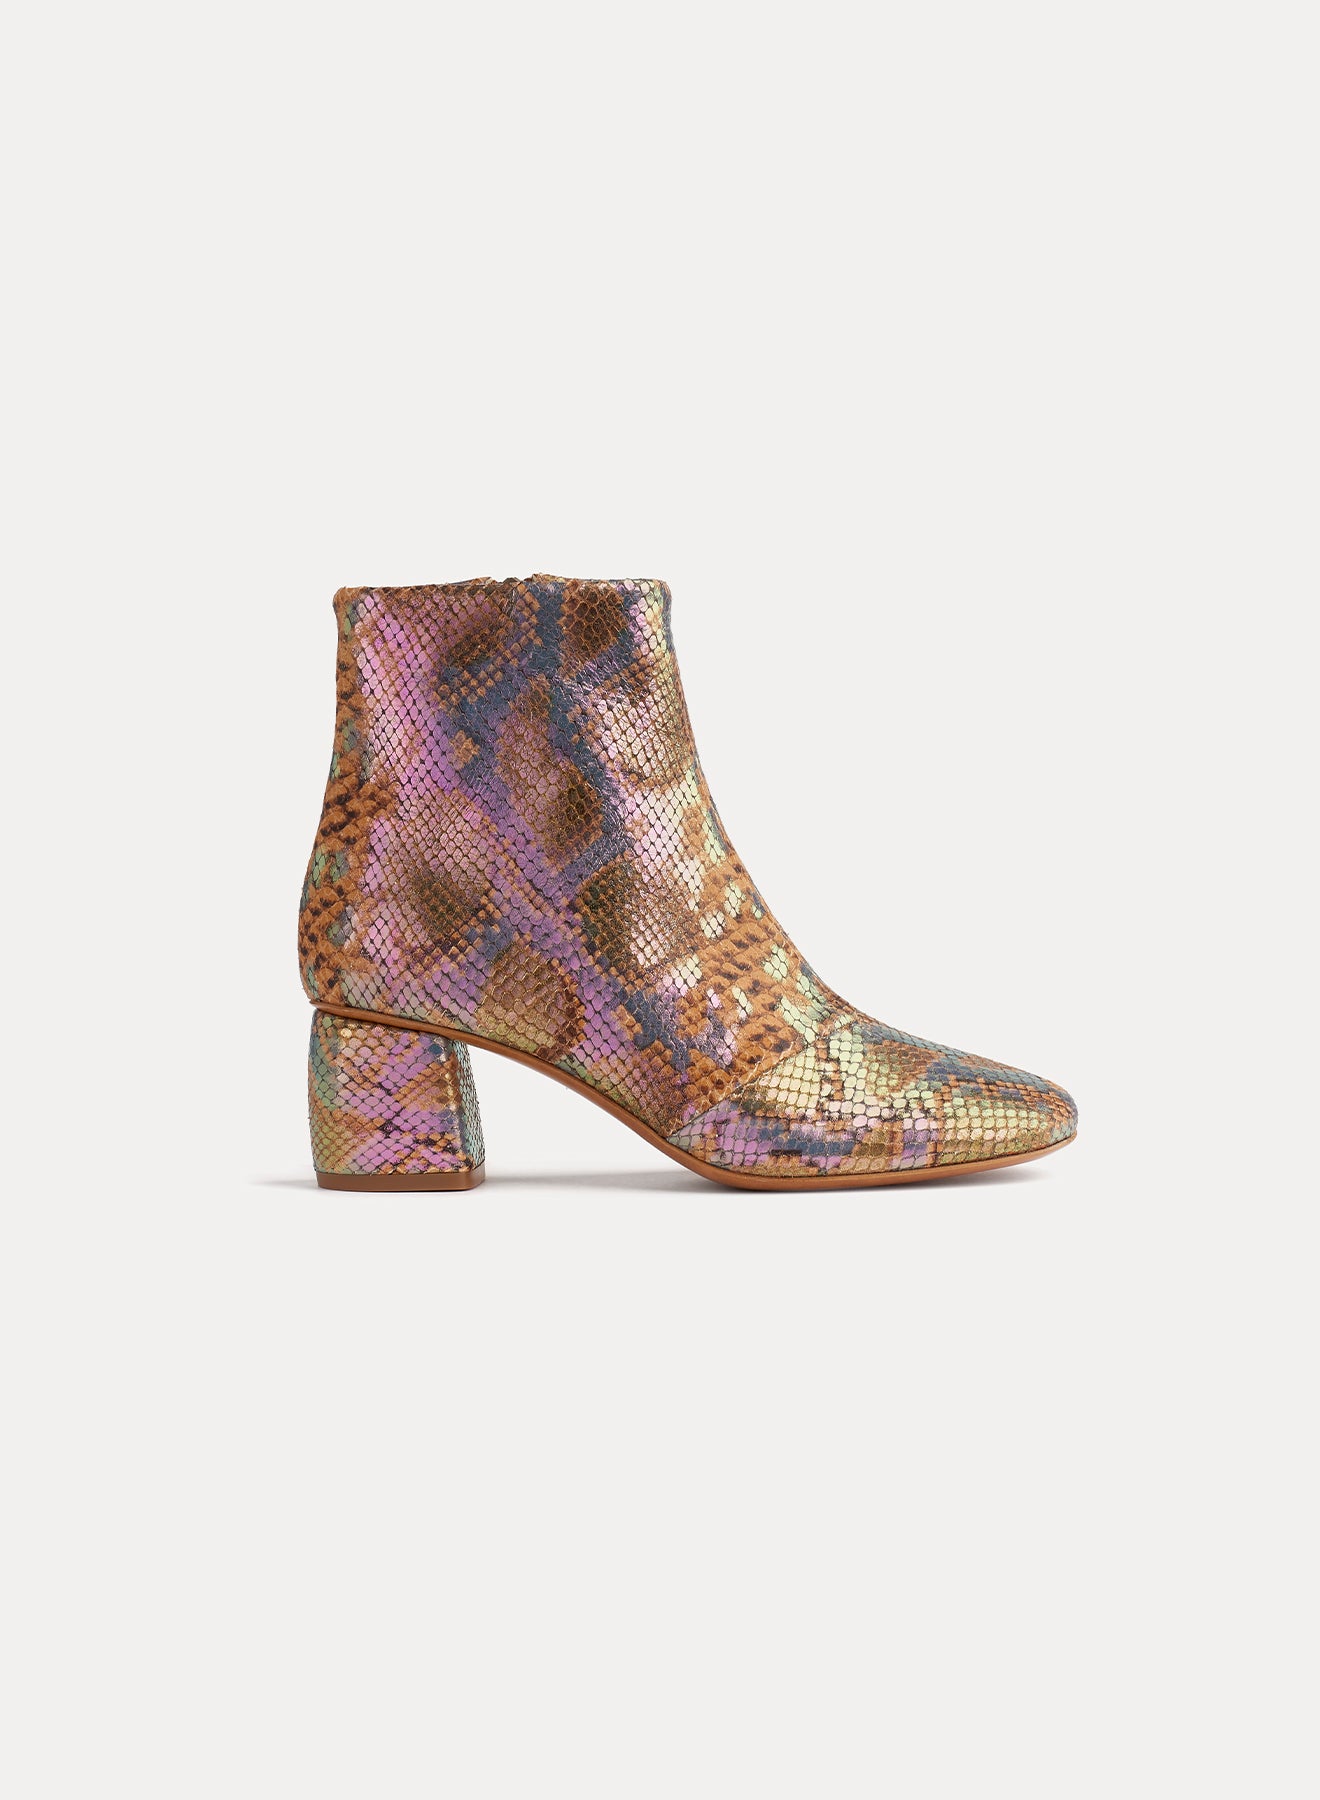 CHIC BOOTS WITH PRINTED CALFSKIN